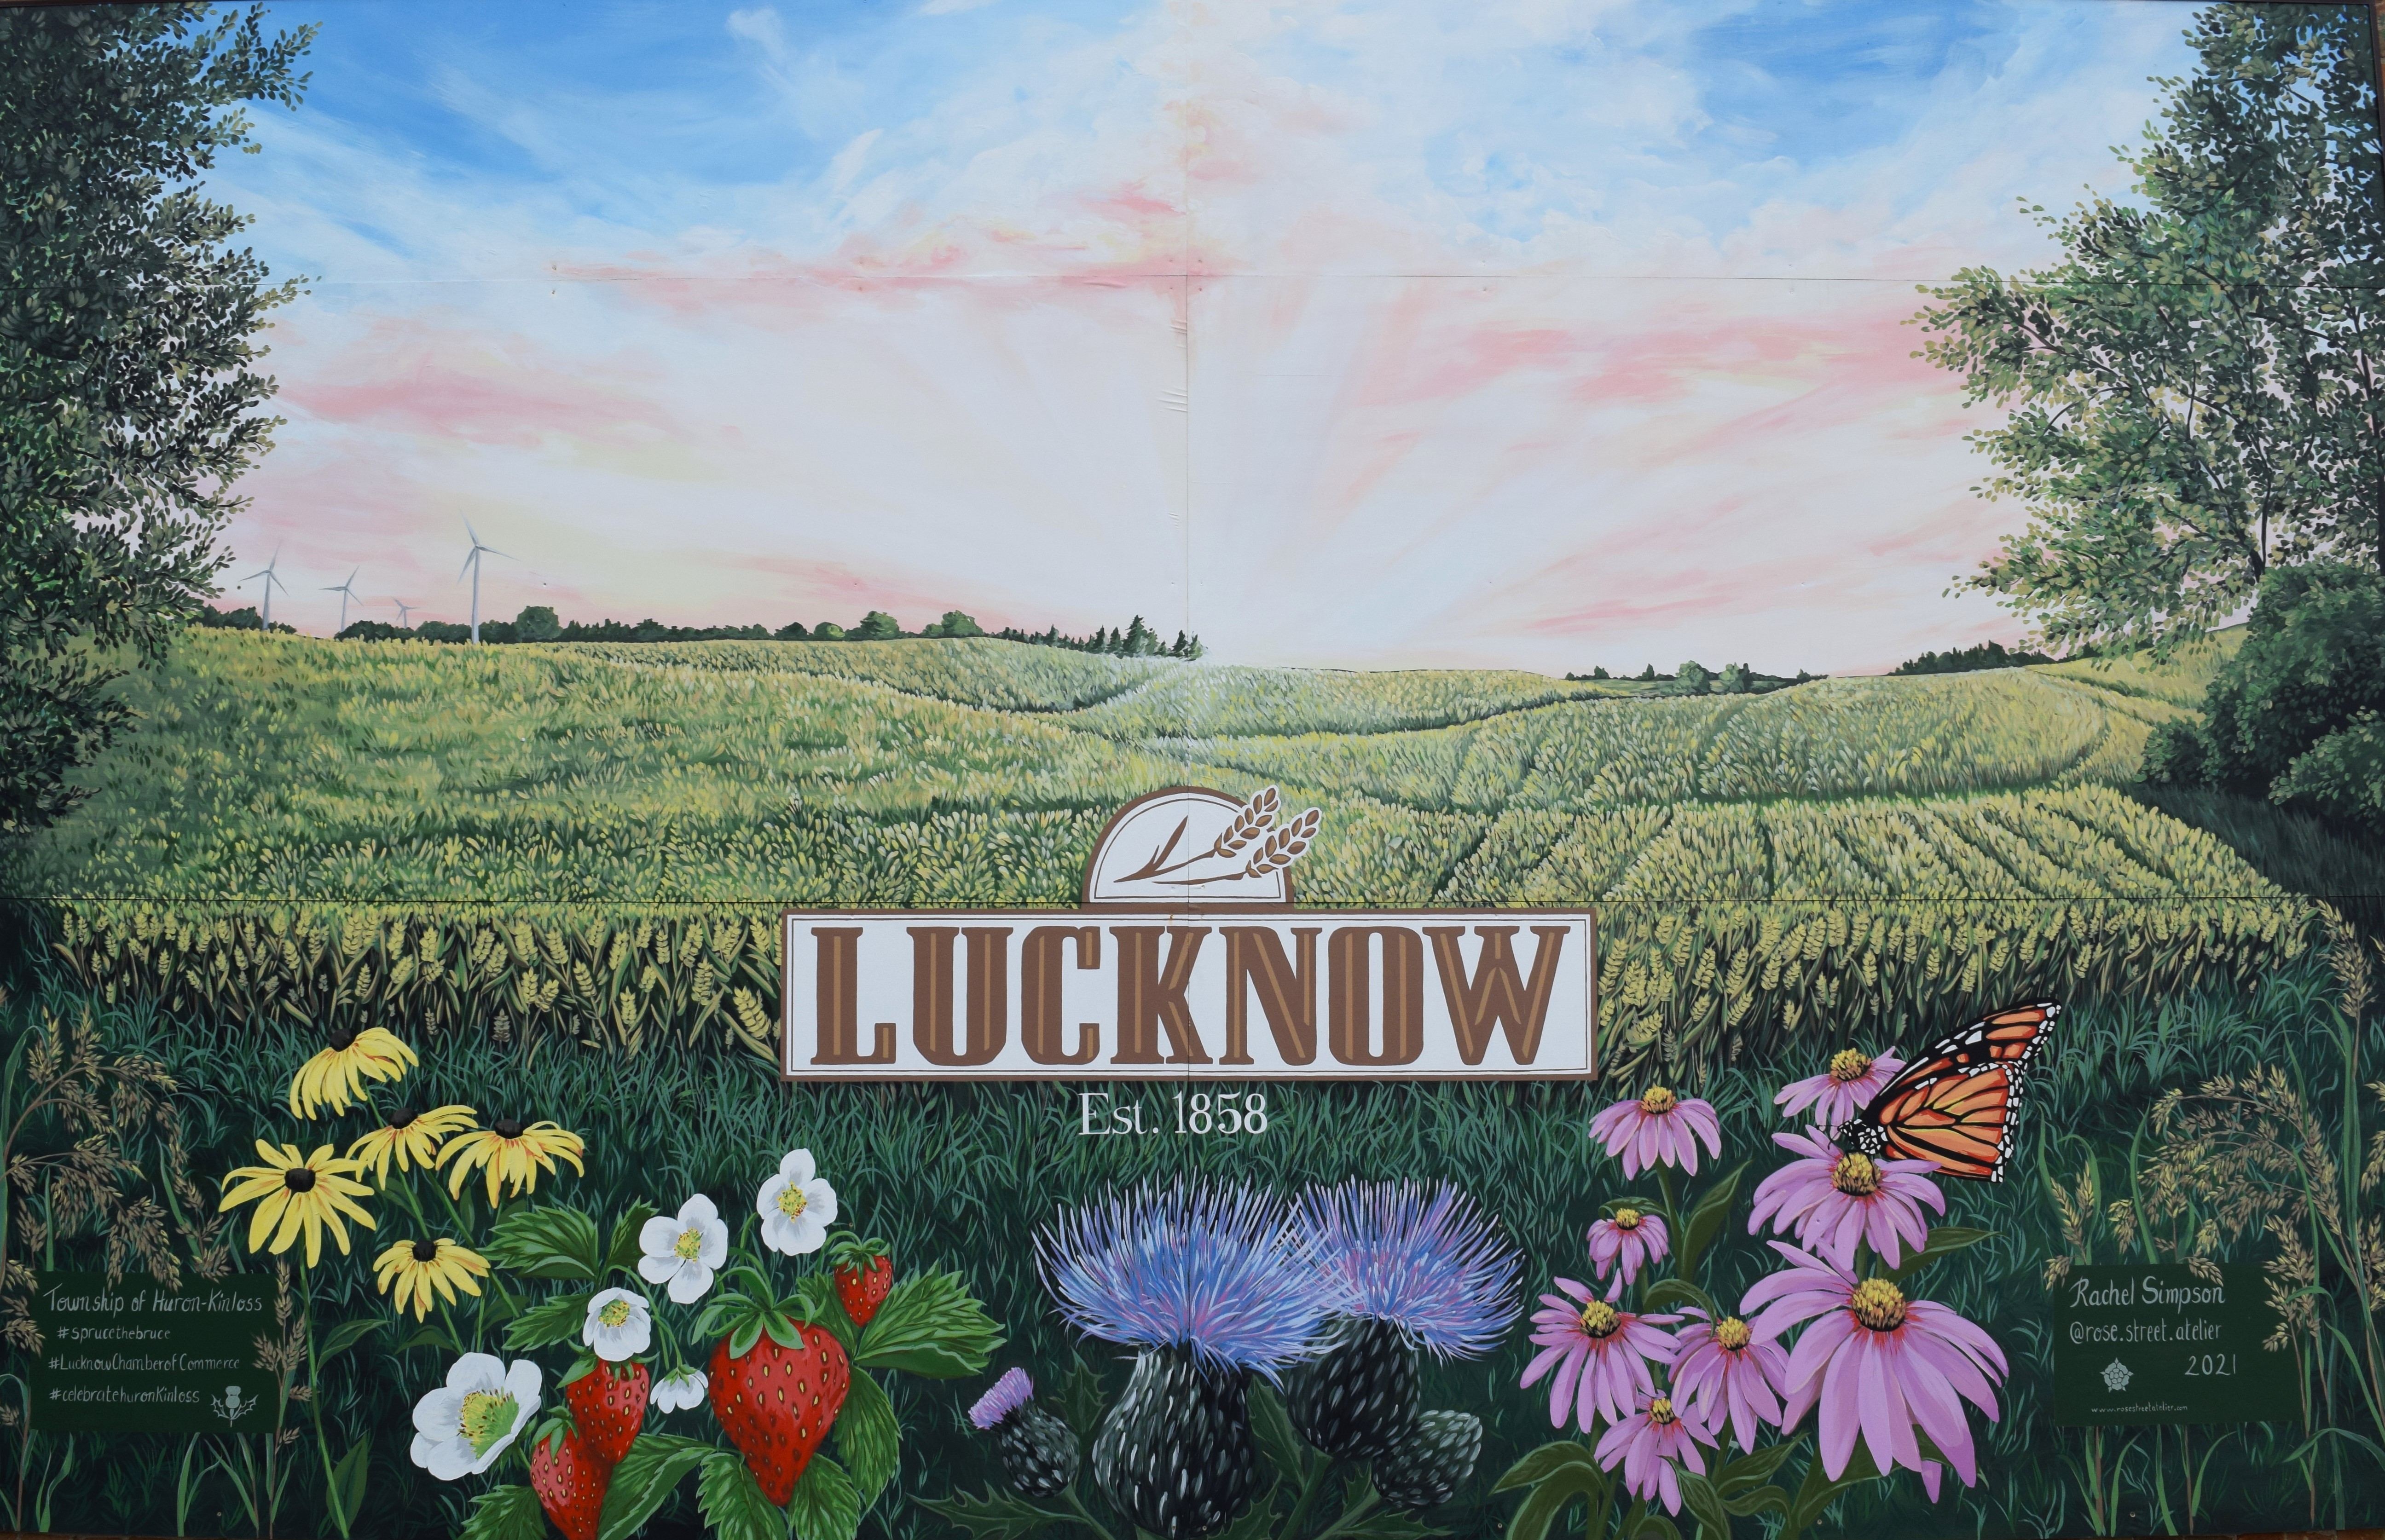 Rural field scene with flowers and Lucknow's logo